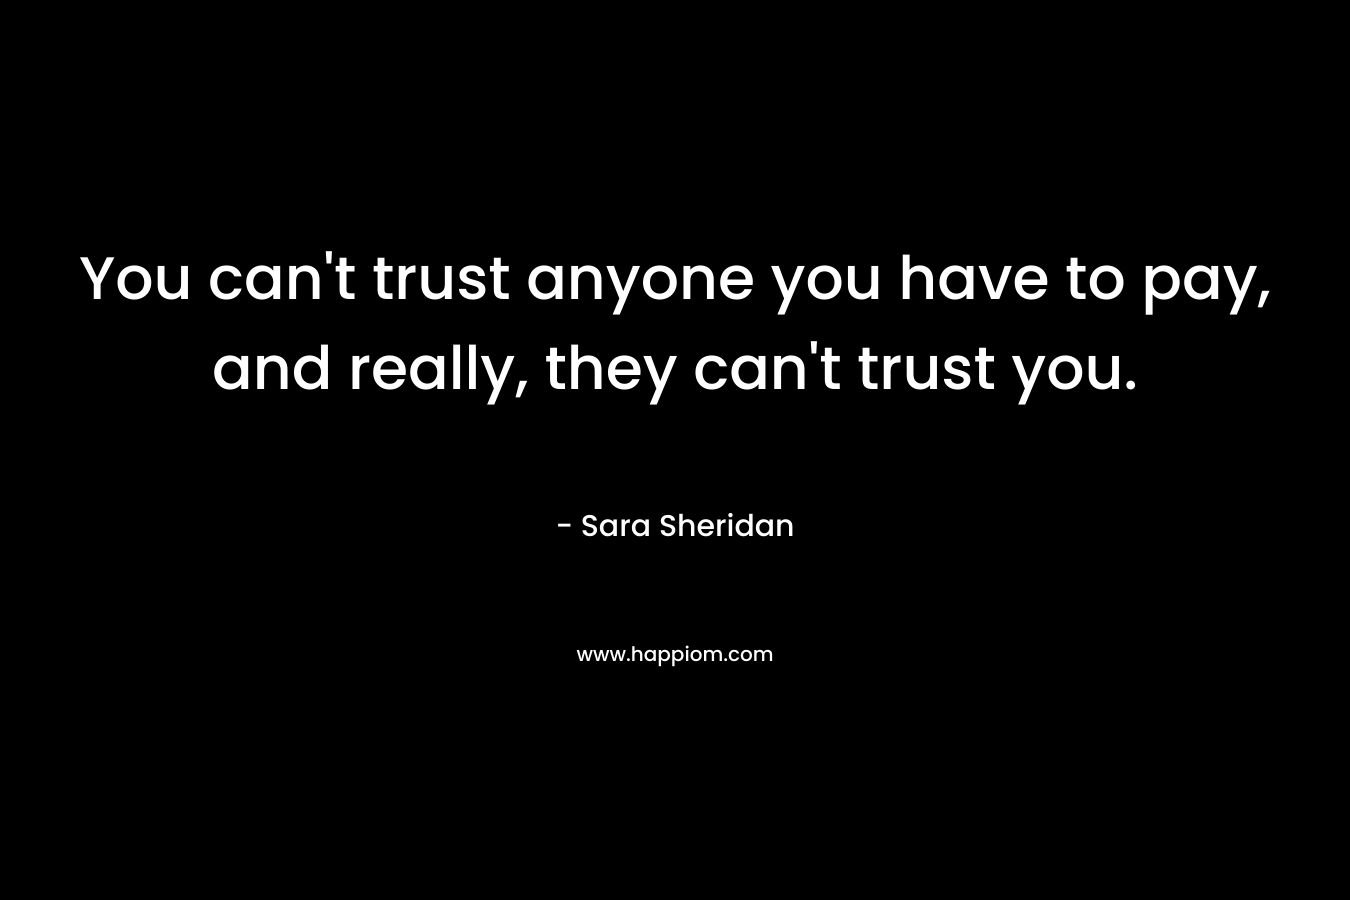 You can't trust anyone you have to pay, and really, they can't trust you.